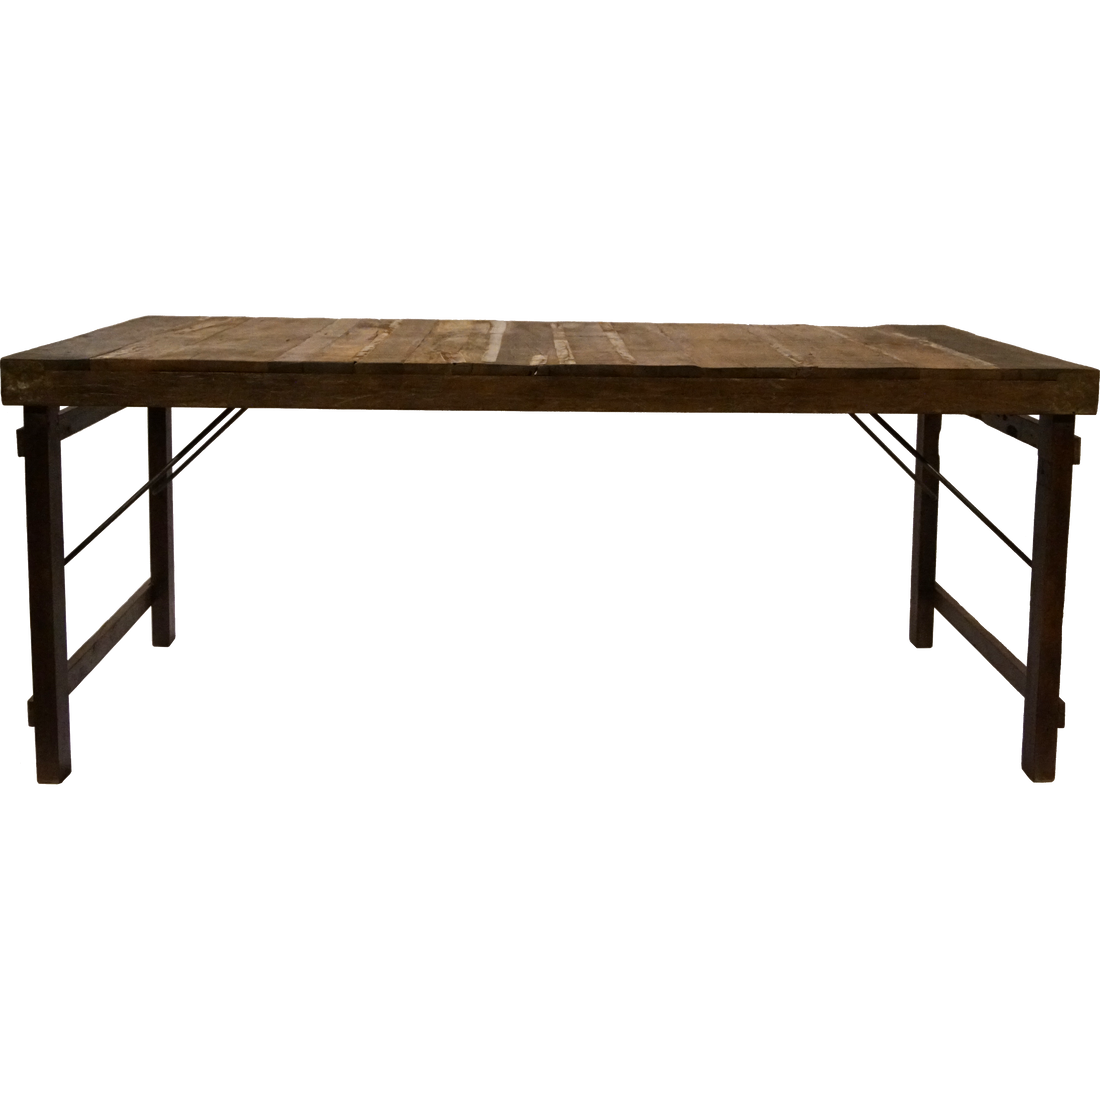 Trademark Living Ubud dining table in recycled wood